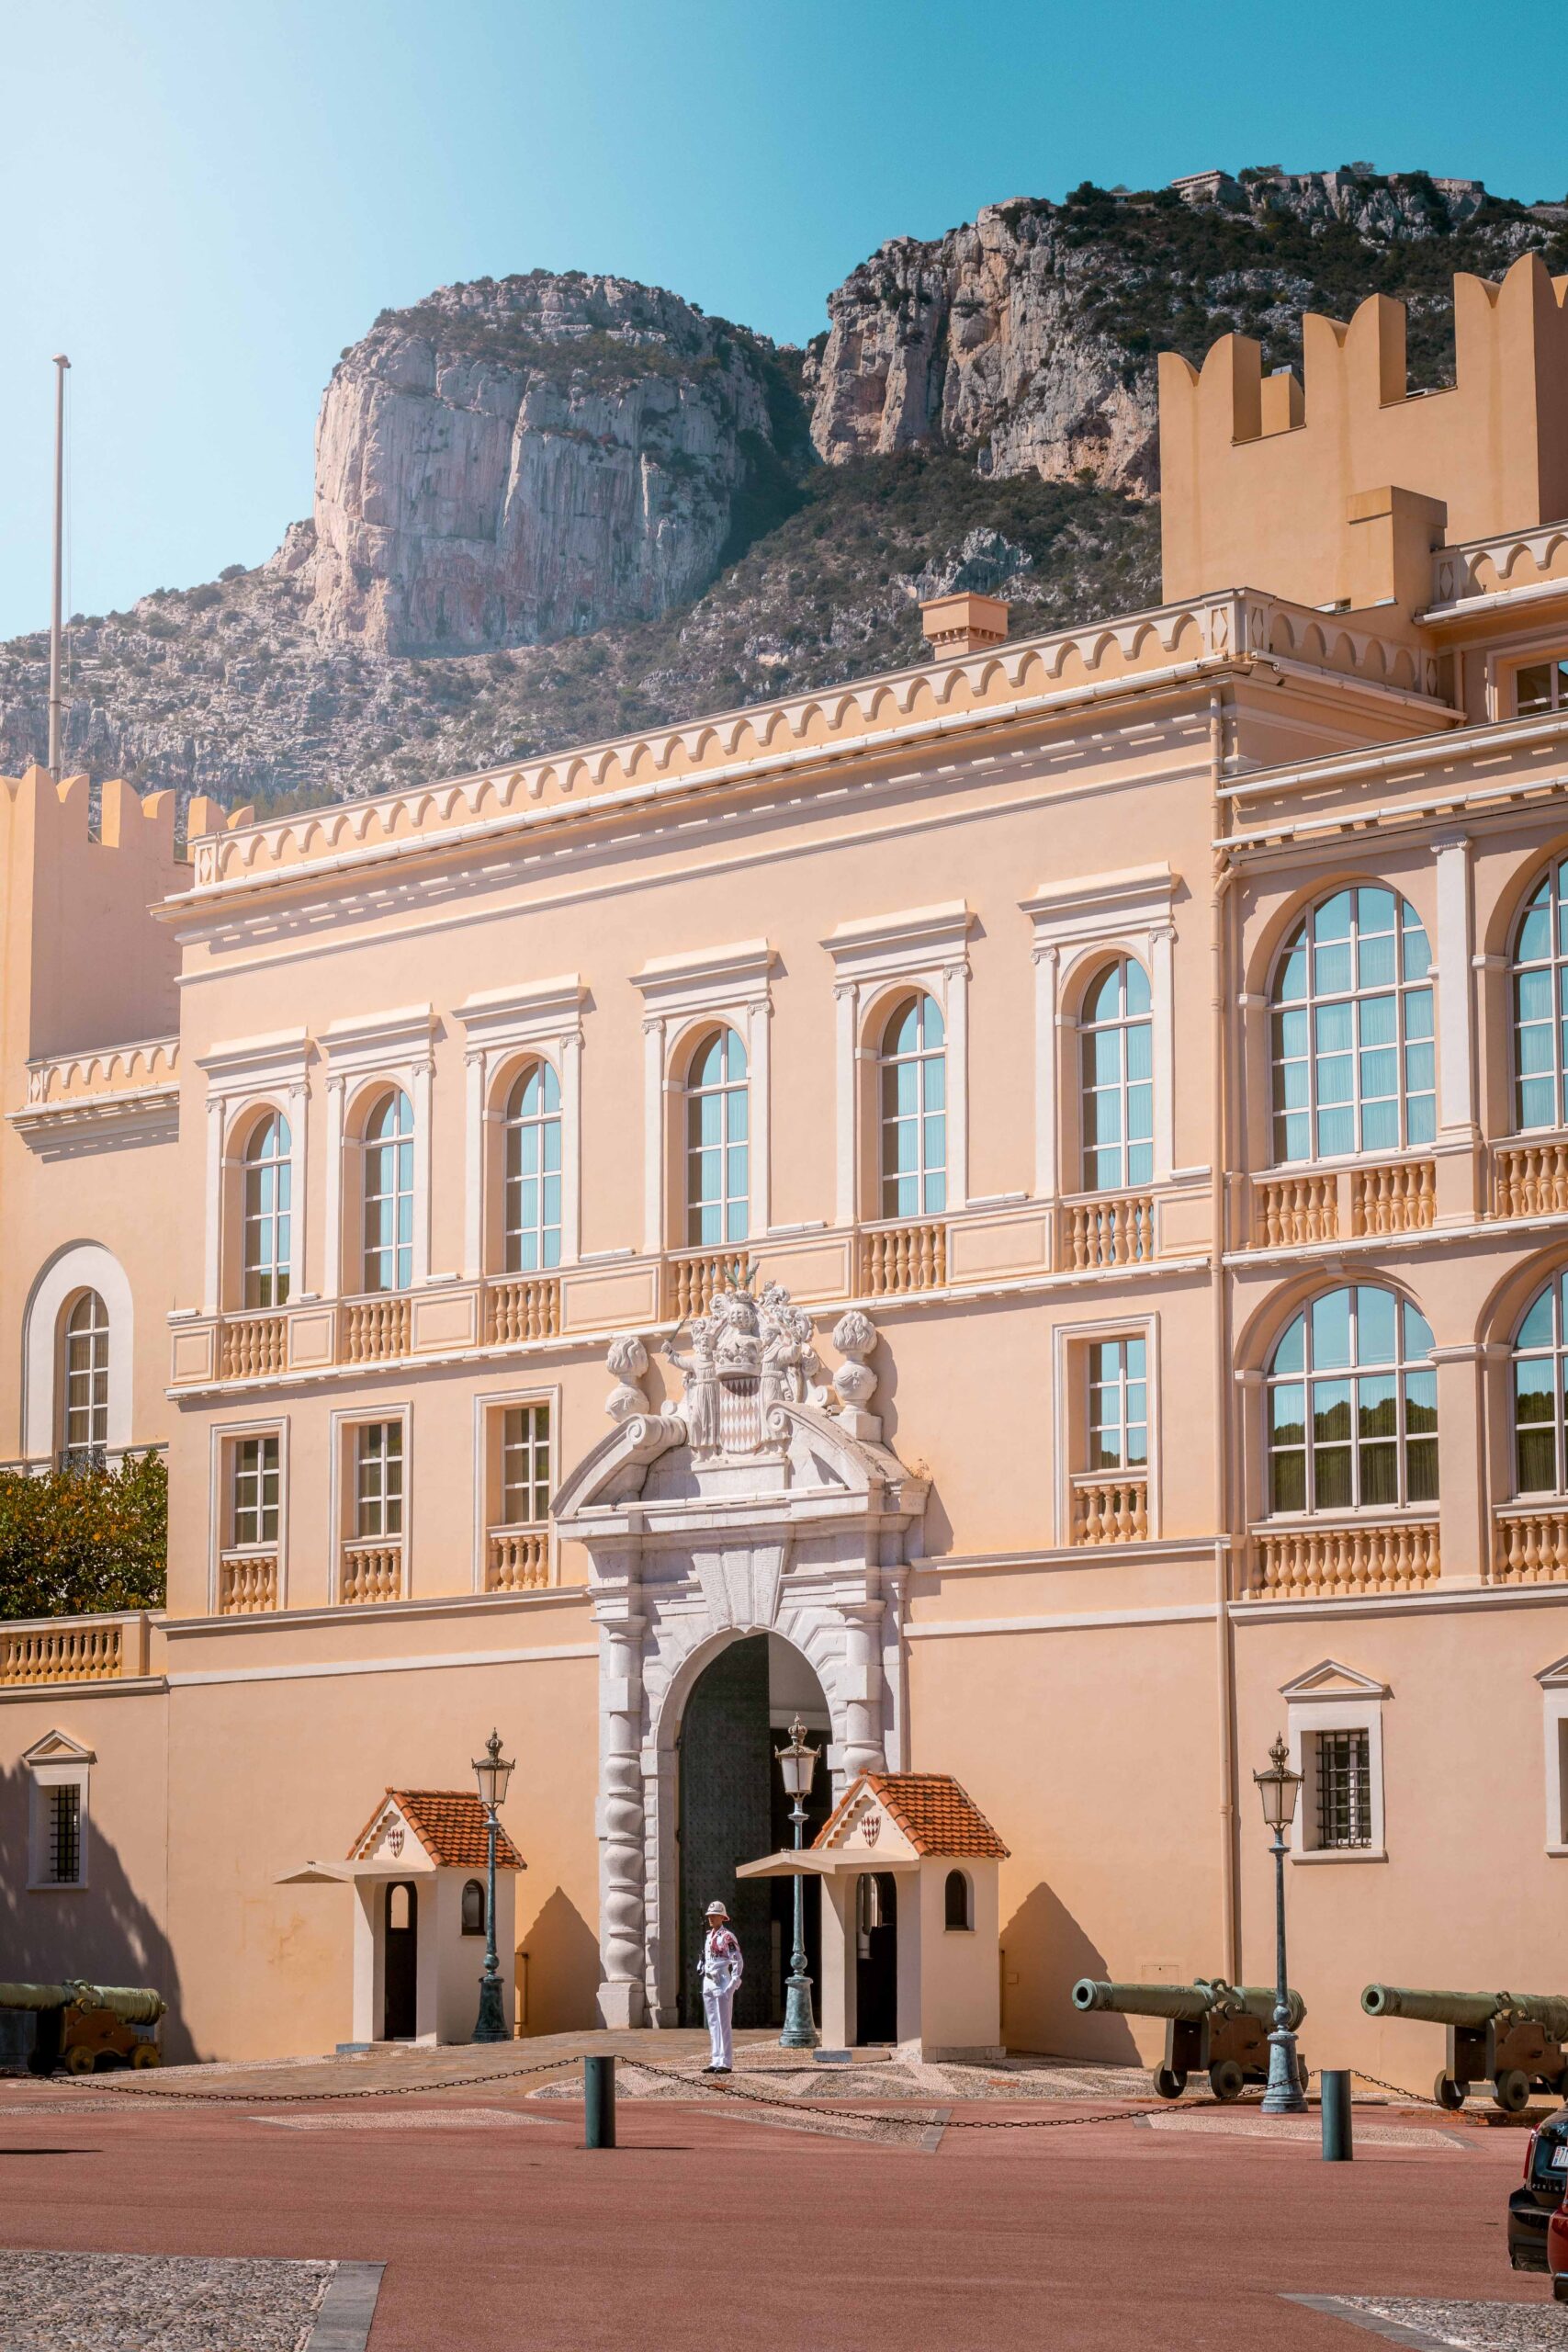 Facade of the Prince's Palace of Monaco, featuring a guard and cannons on a sunny day in Monaco